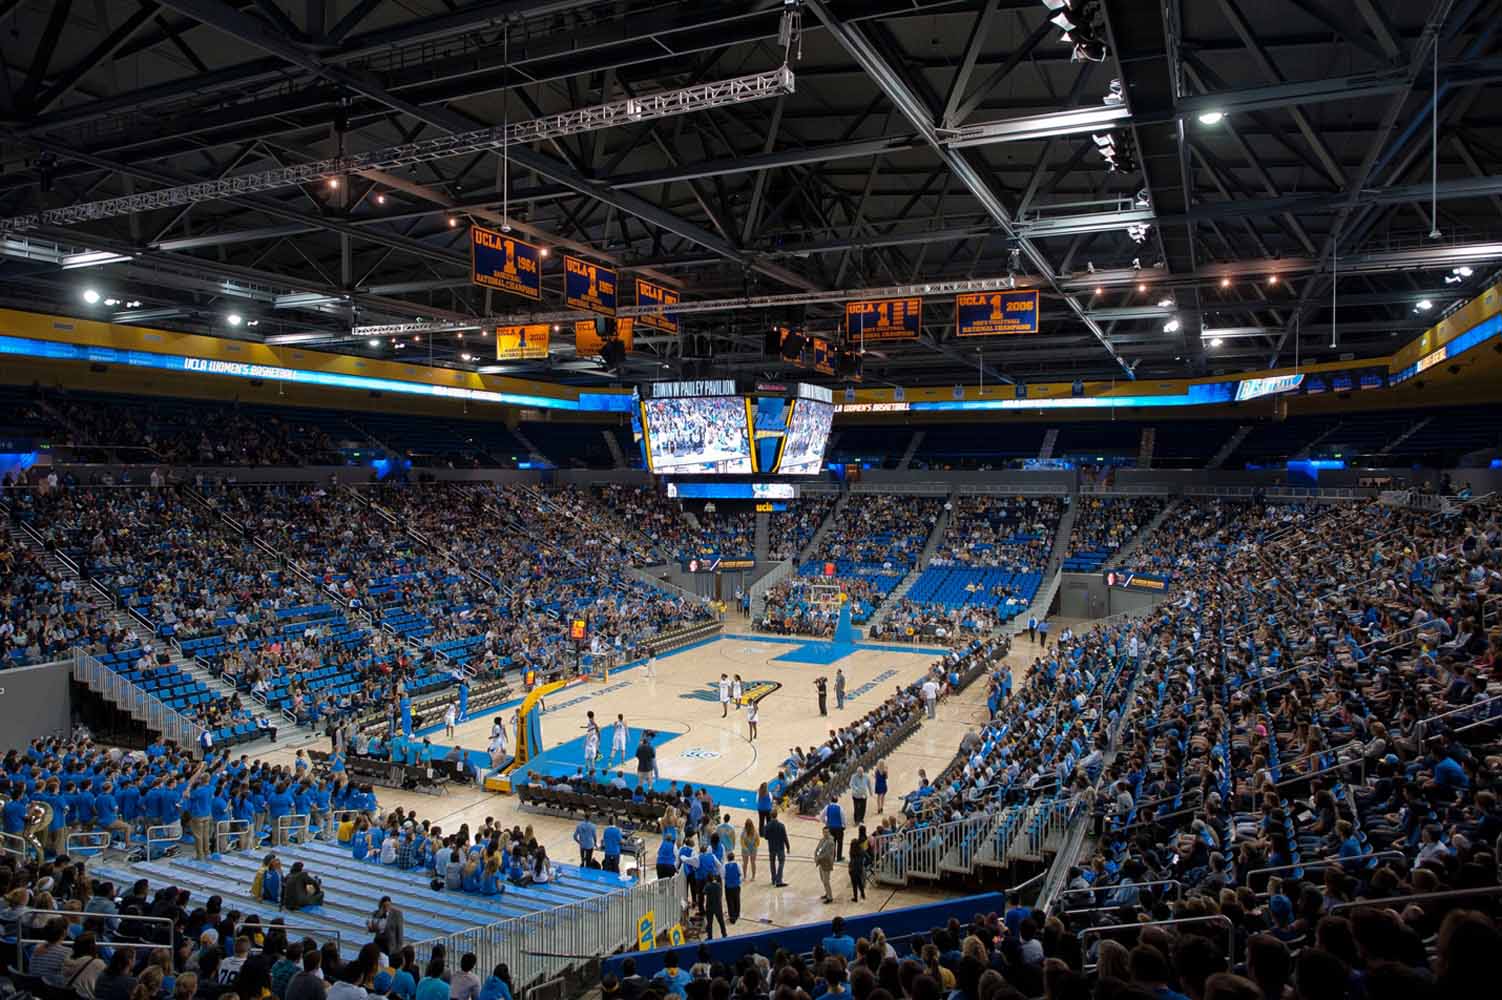 College Sports Arenas | Naming Rights | Sports Law